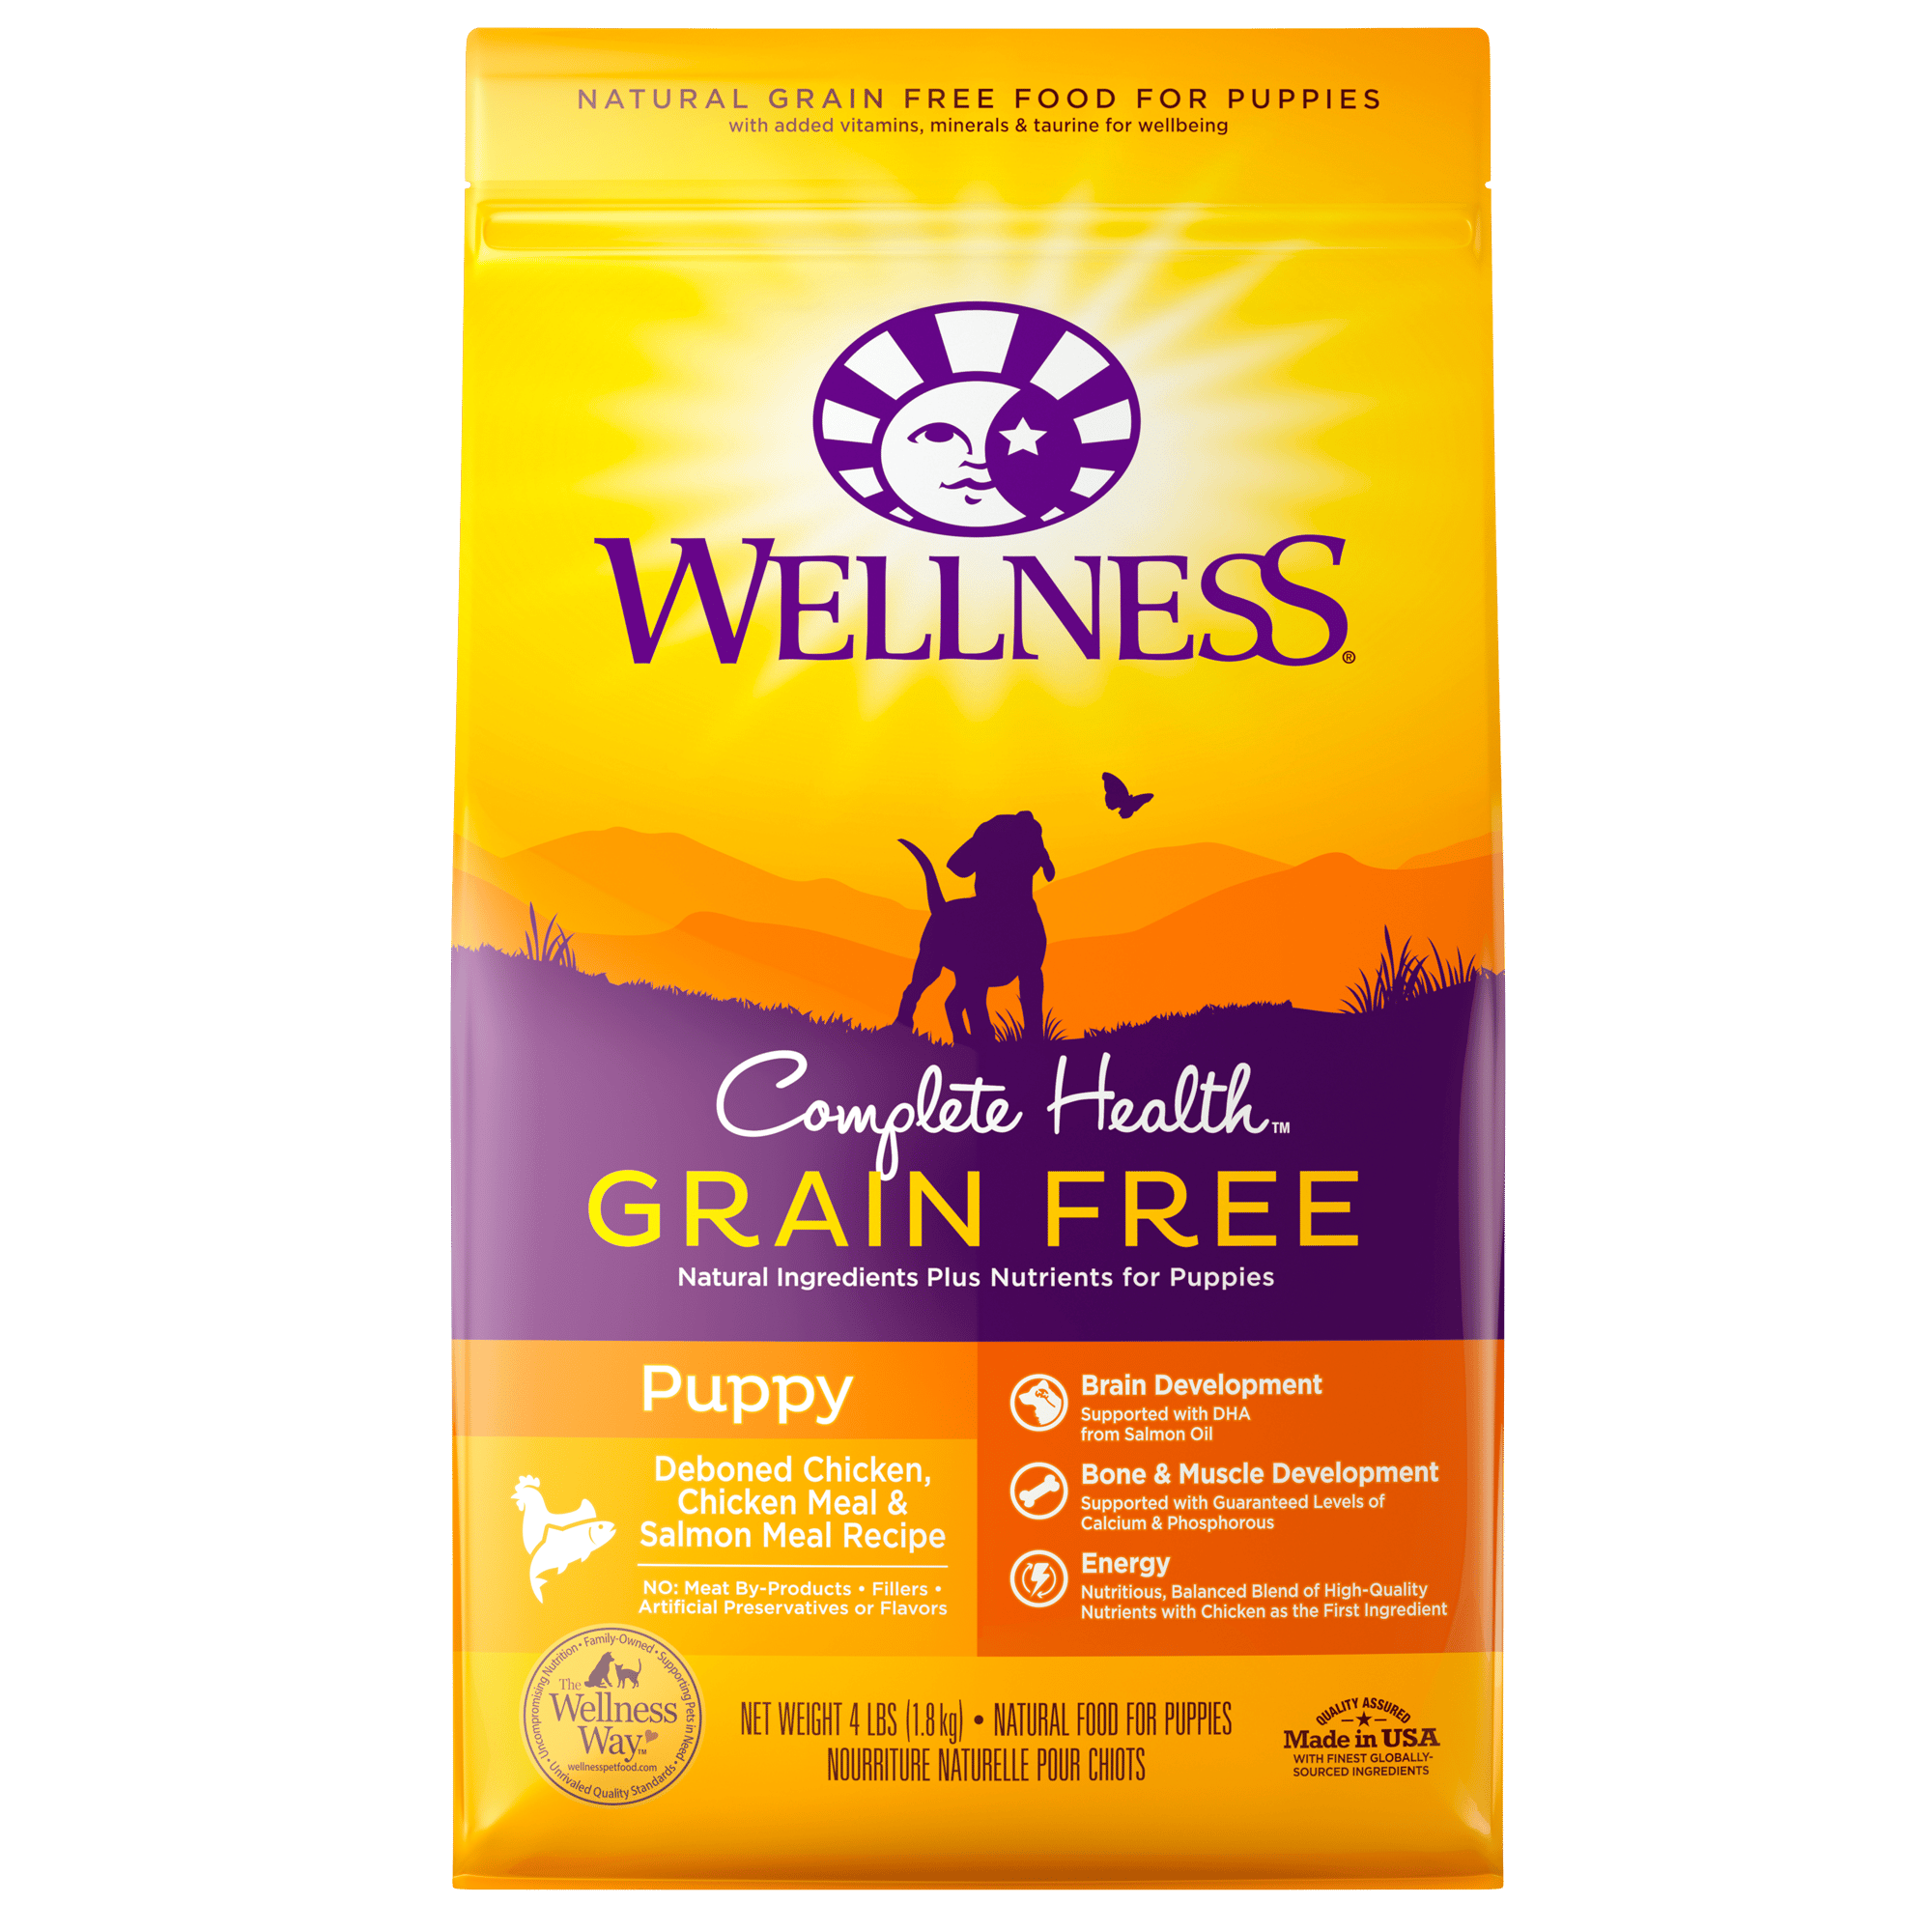 Complete Health Grain Free For Puppy